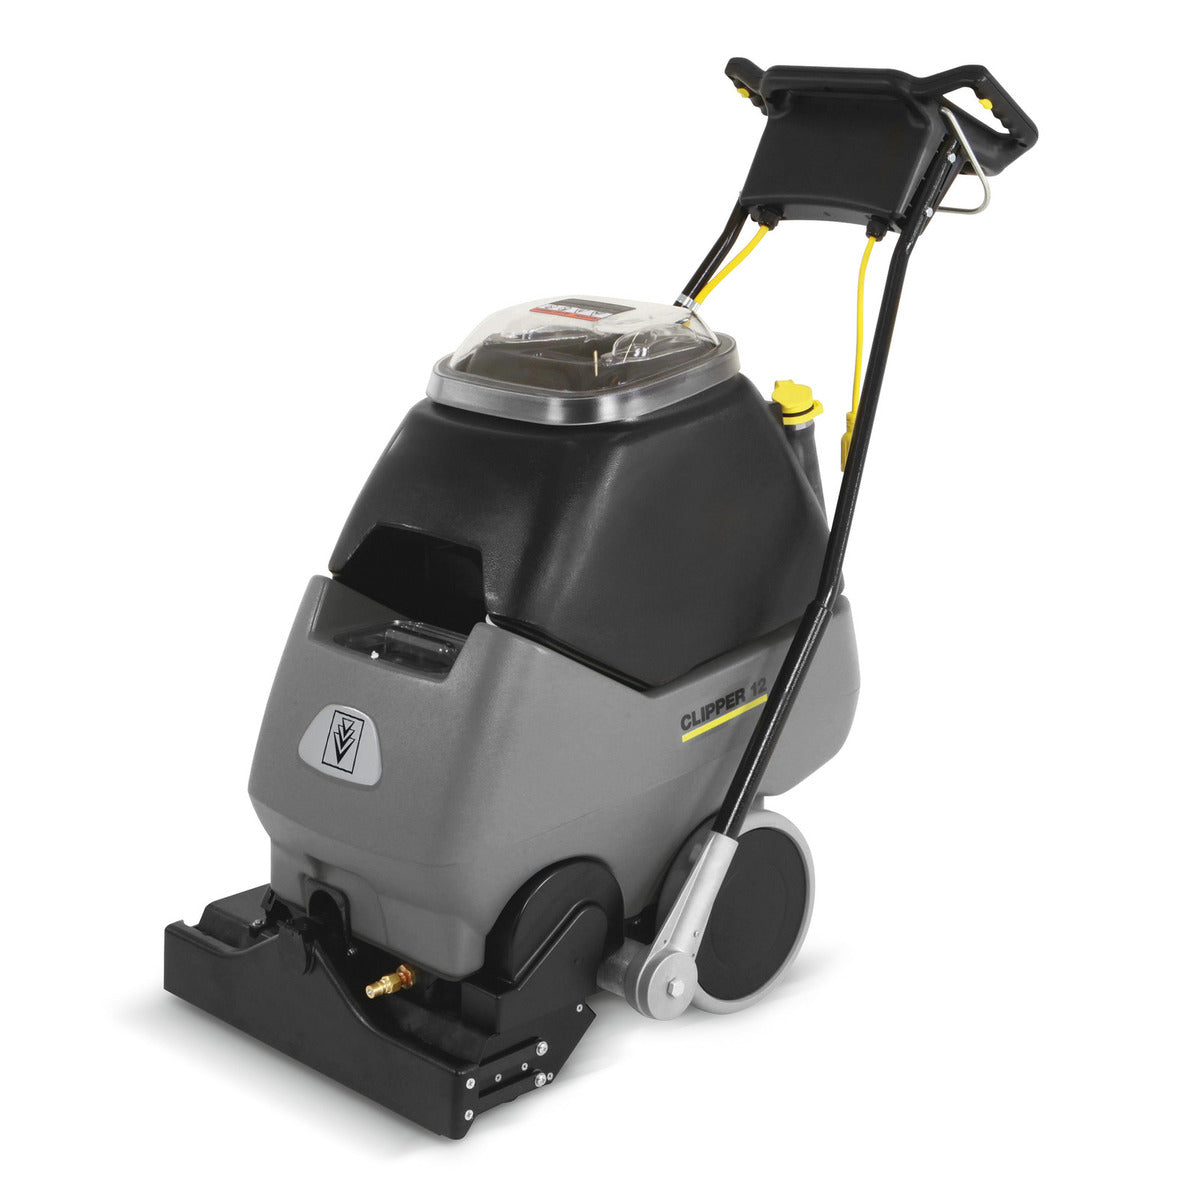 Karcher Clipper 12, Carpet Extractor, 12 Gallon, 18", Self Contained, Forward and Reverse